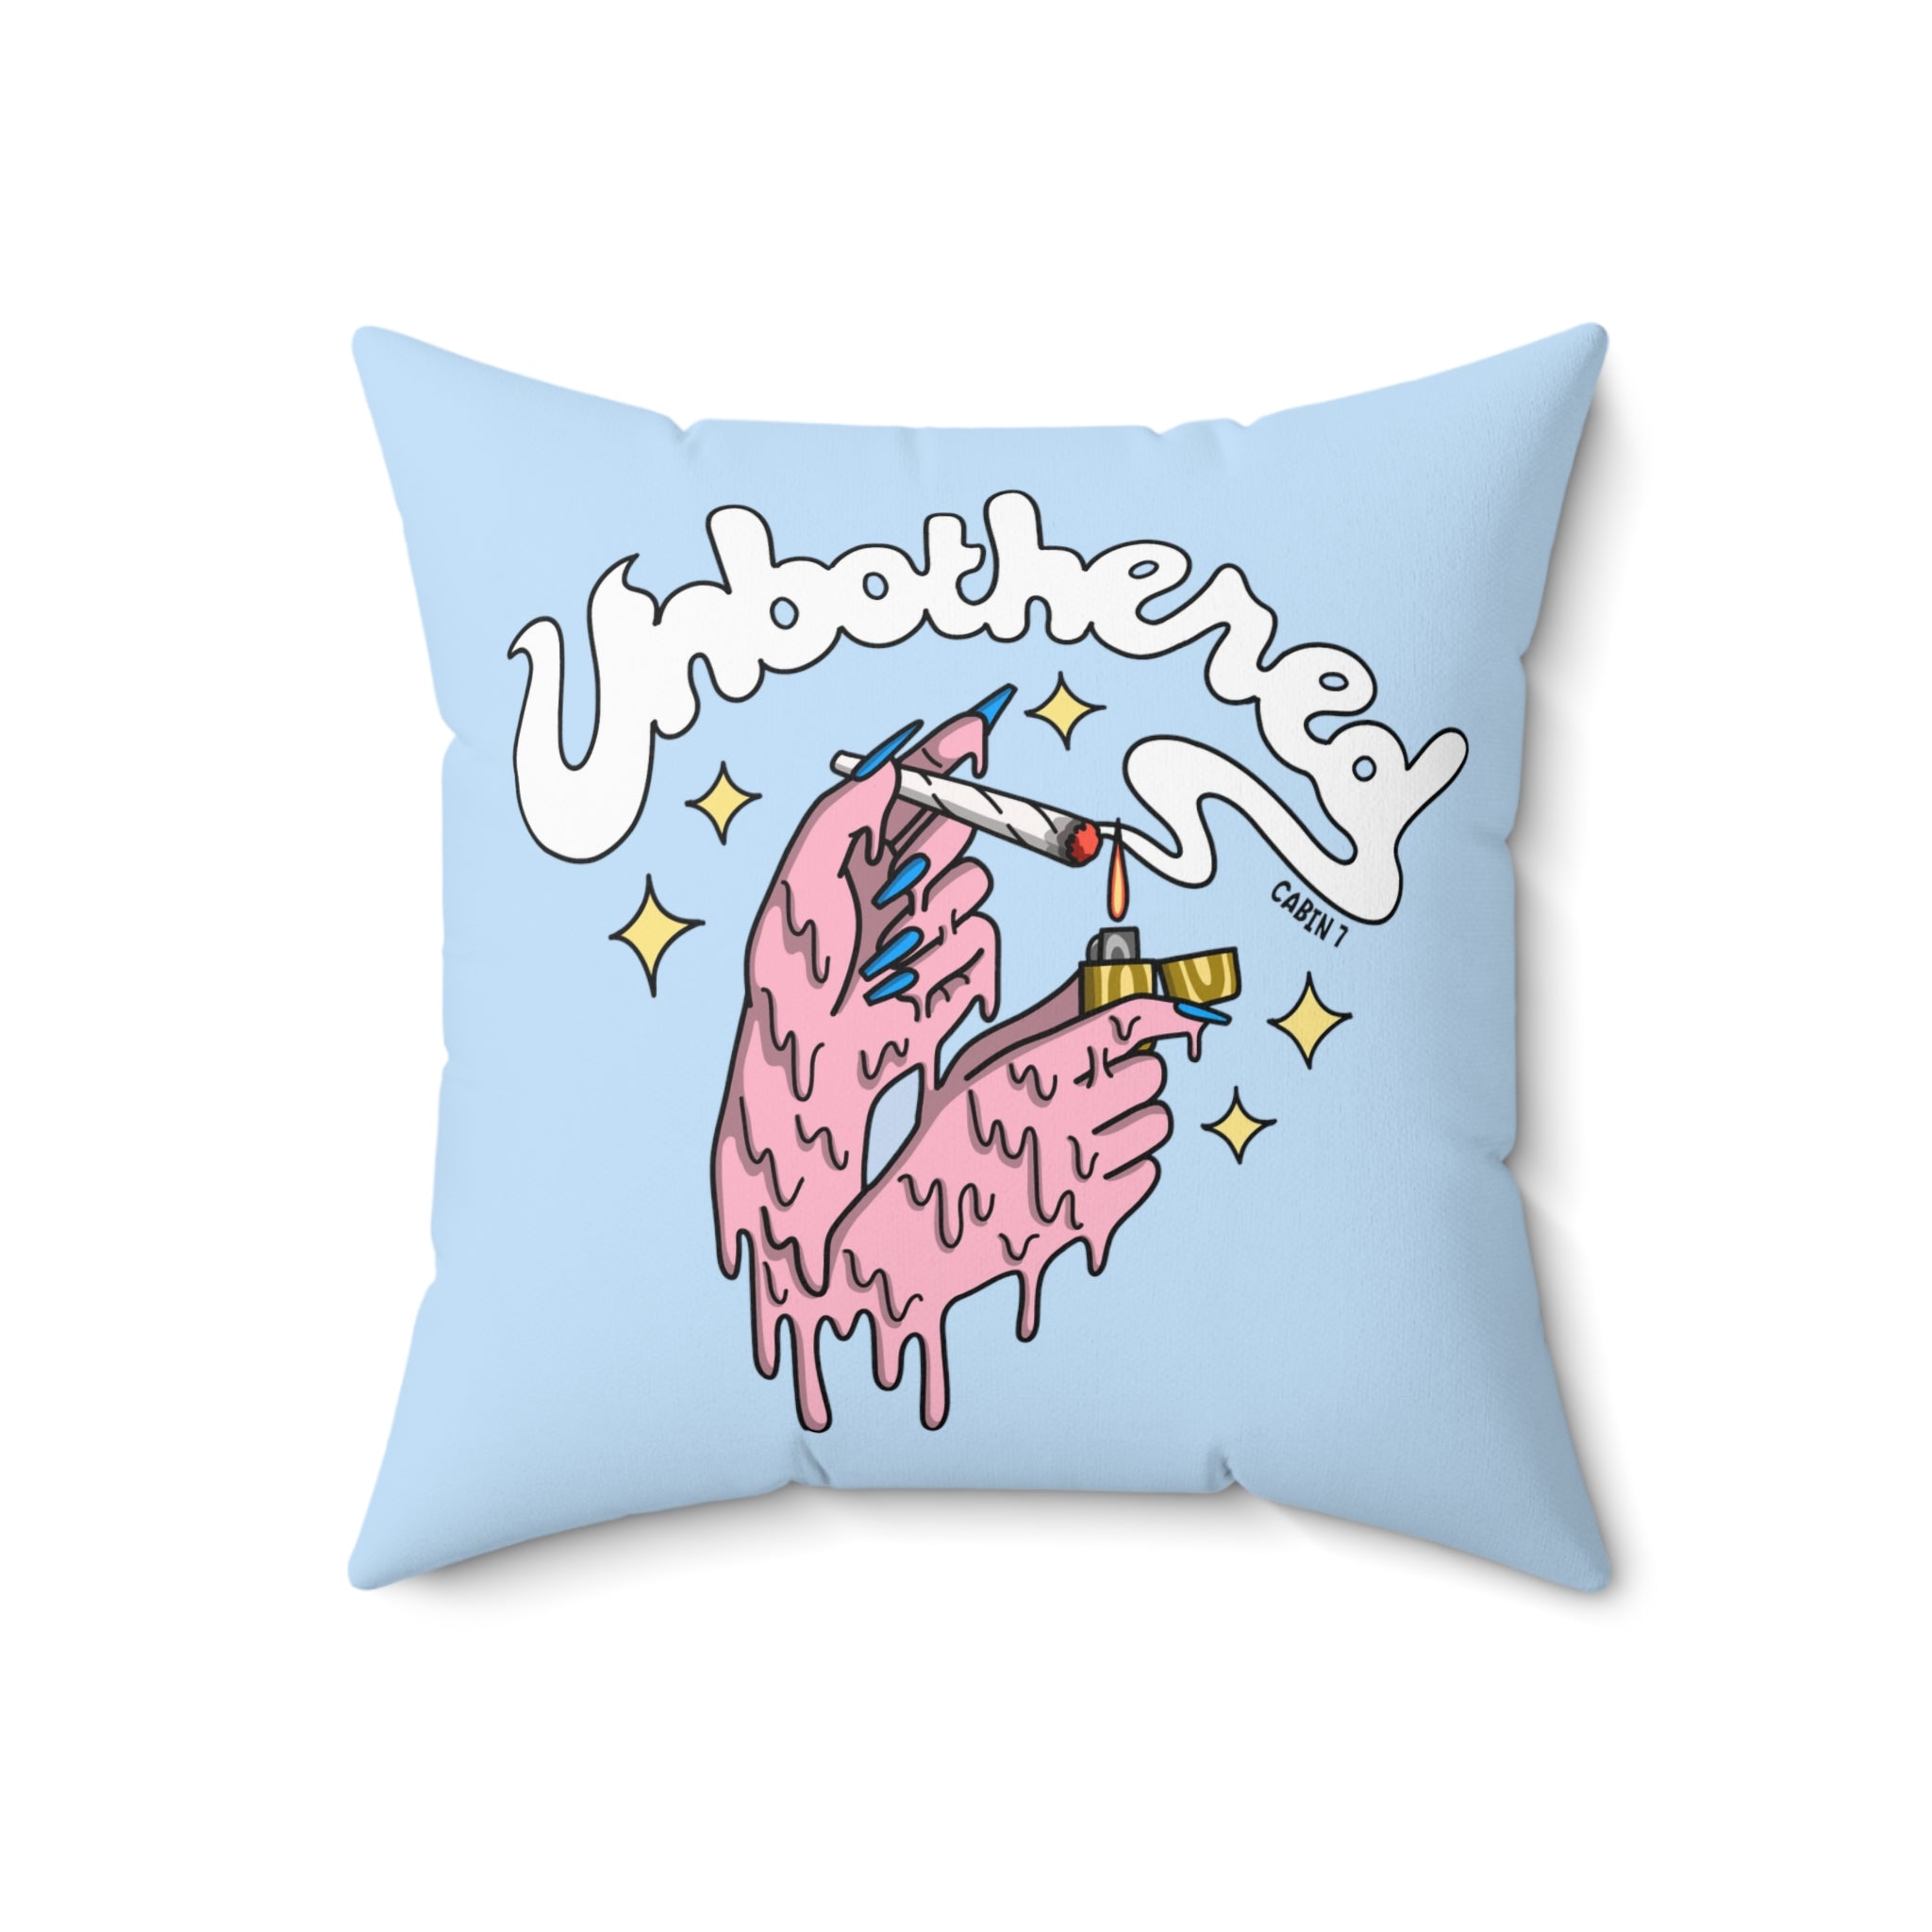 Unbothered Throw Pillow